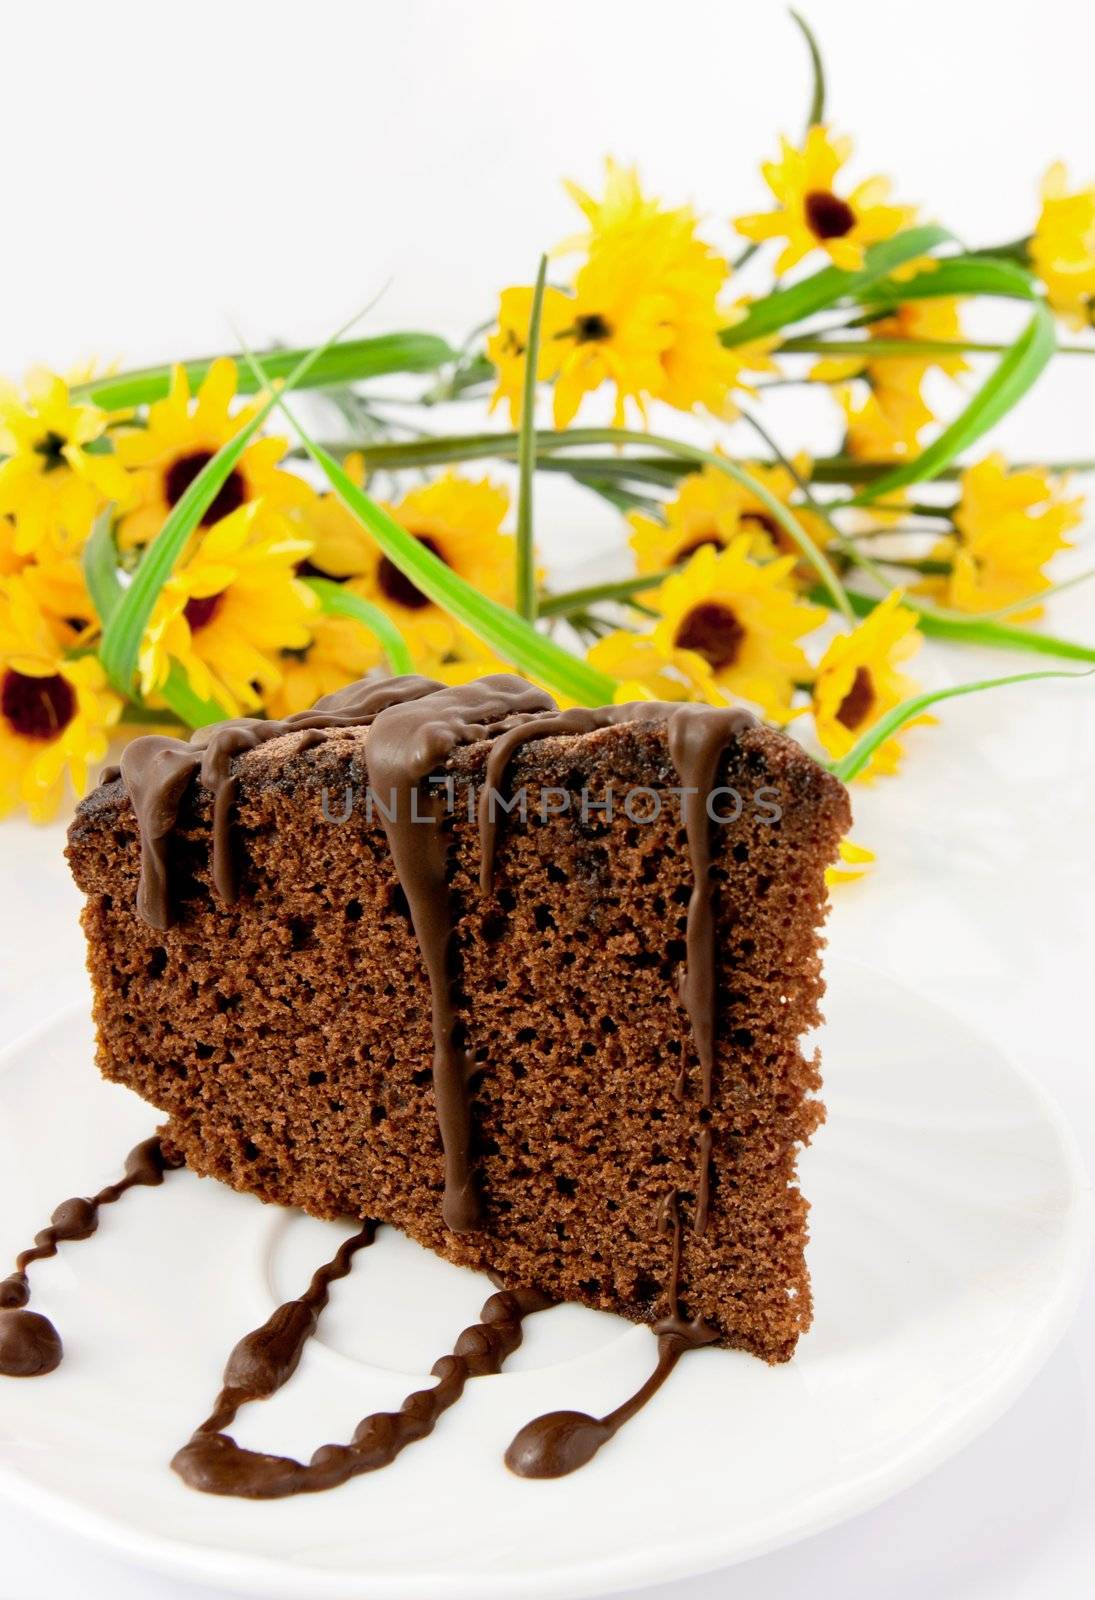 Gingerbread on plate. Yellow flowers in background